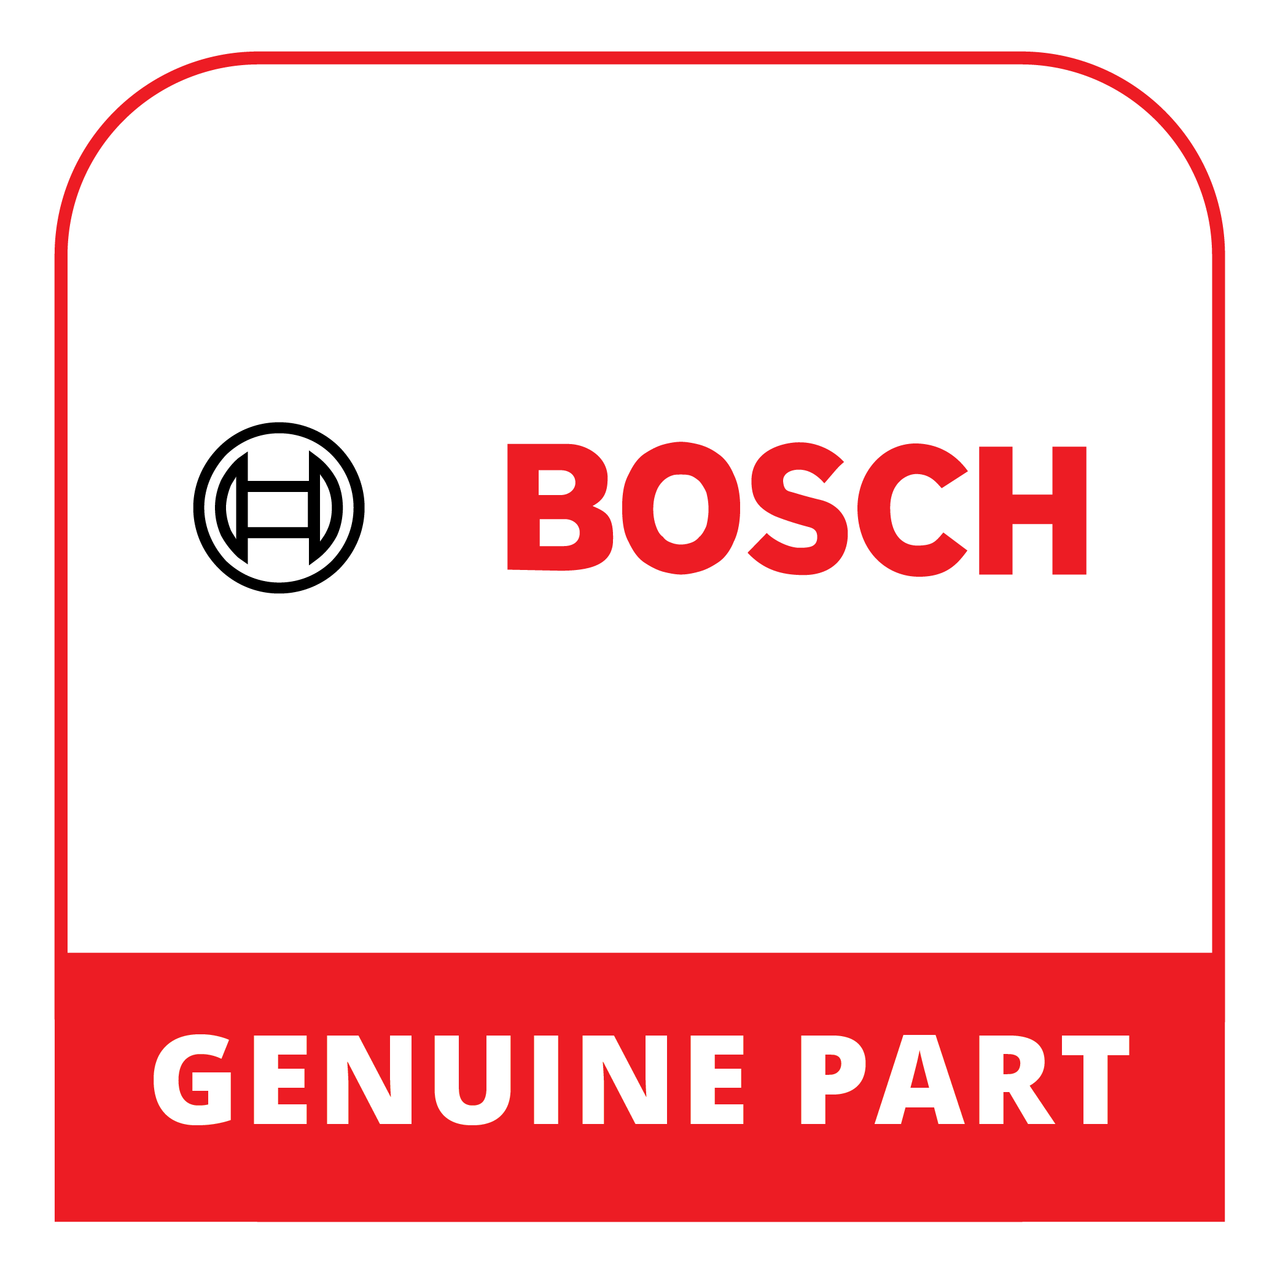 Bosch (Thermador) 20000599 - Front Panel - Genuine Bosch (Thermador) Part